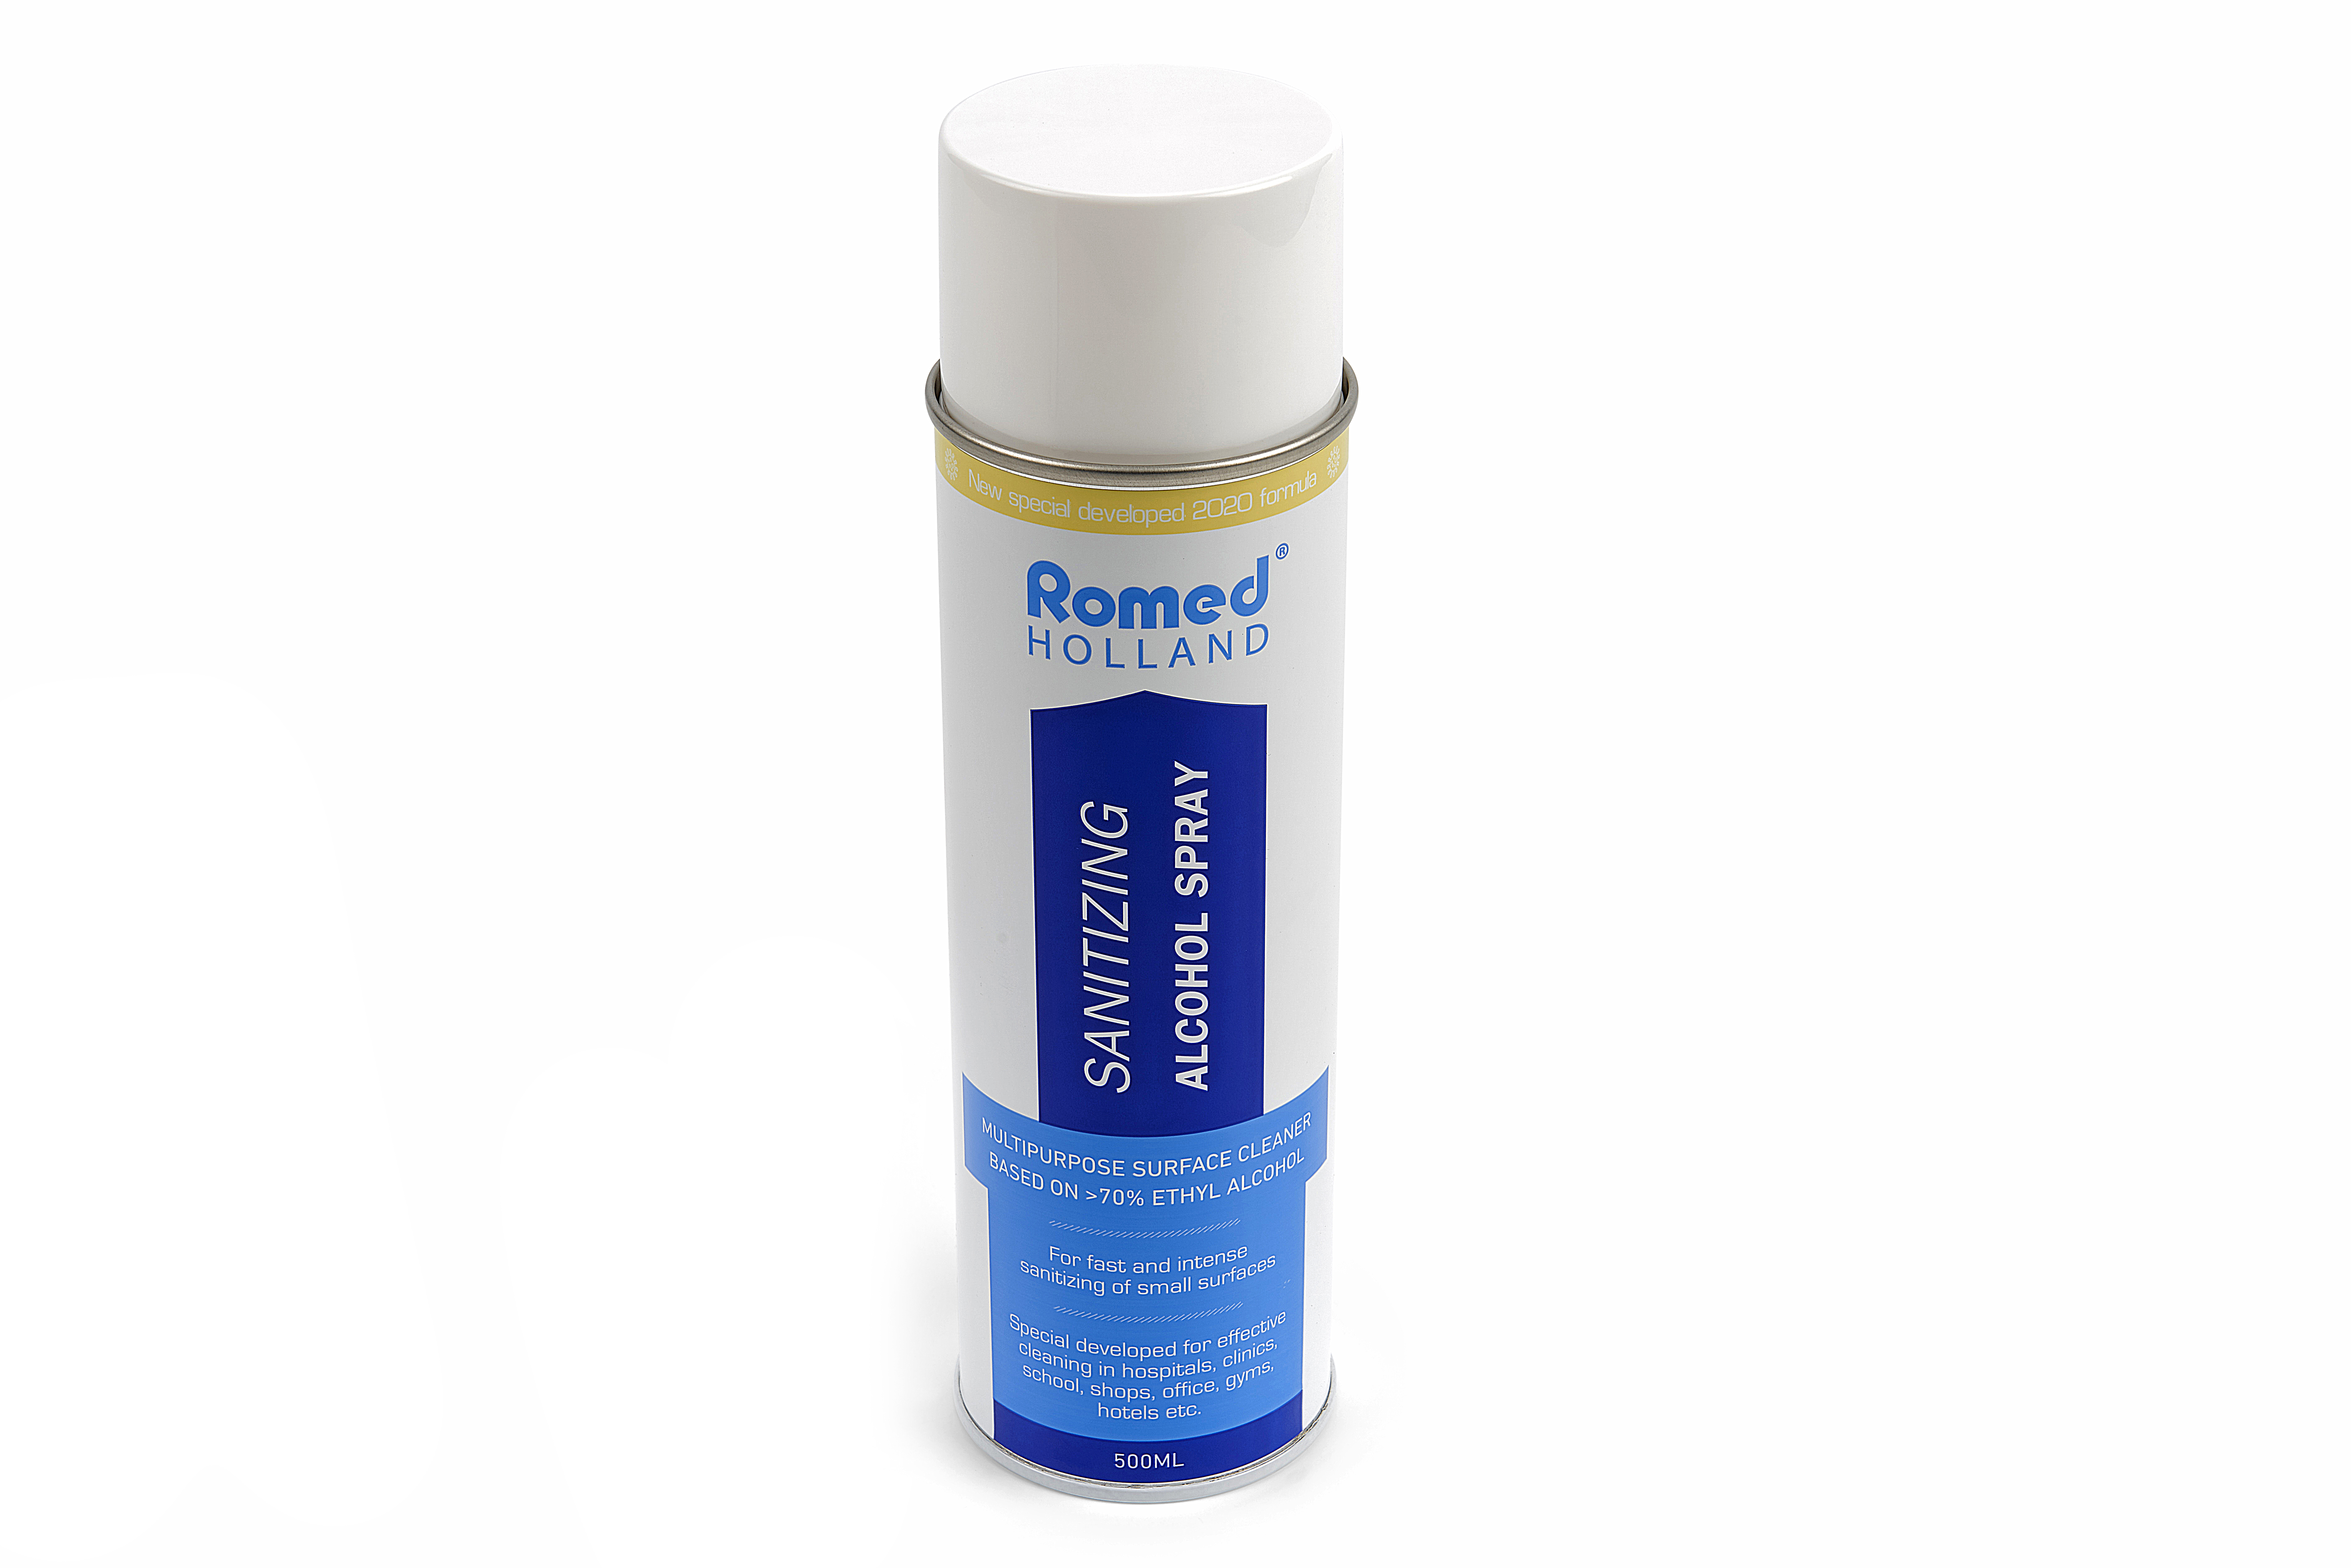 COV19-SPRAY Romed Sanitizing spray, for fast and intense sanitizing of small surfaces. 12 aerosols, 500ml, in a carton.